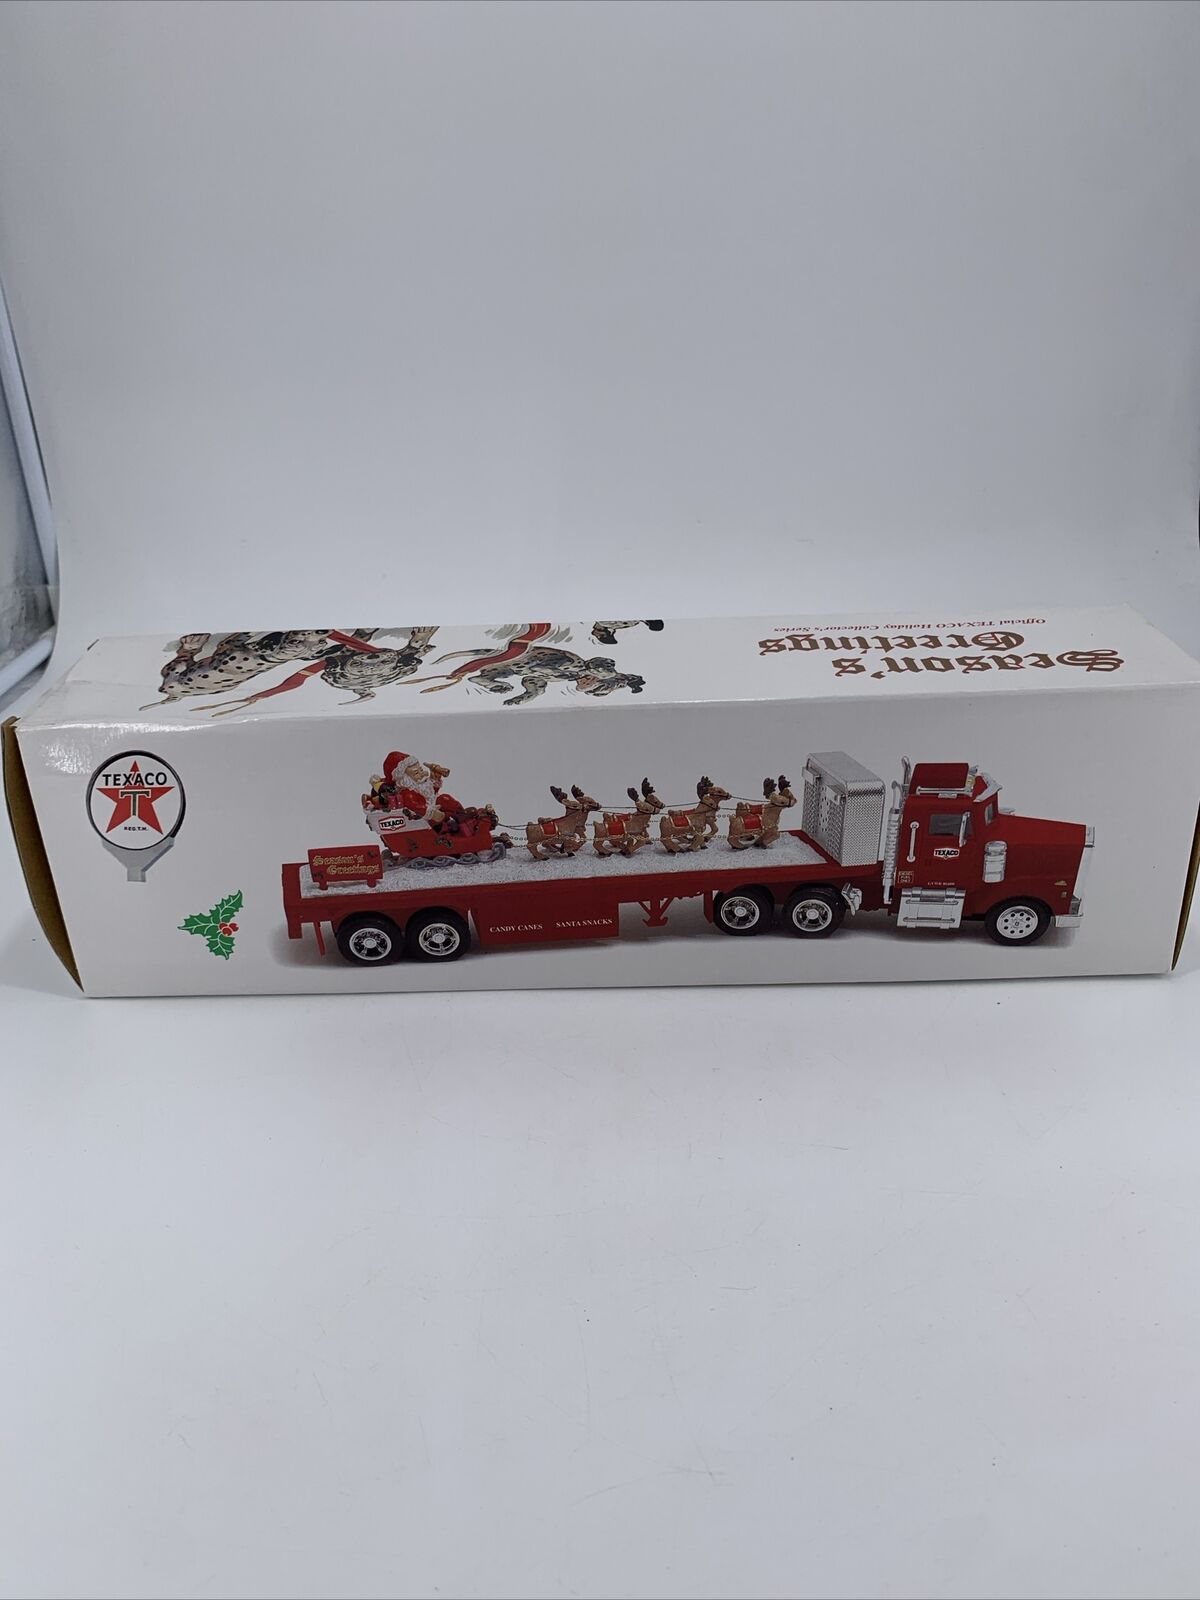 2000 TEXACO SEASONS GREETINGS FLATBED TRUCK ONLY 3504 MADE, NEW IN BOX